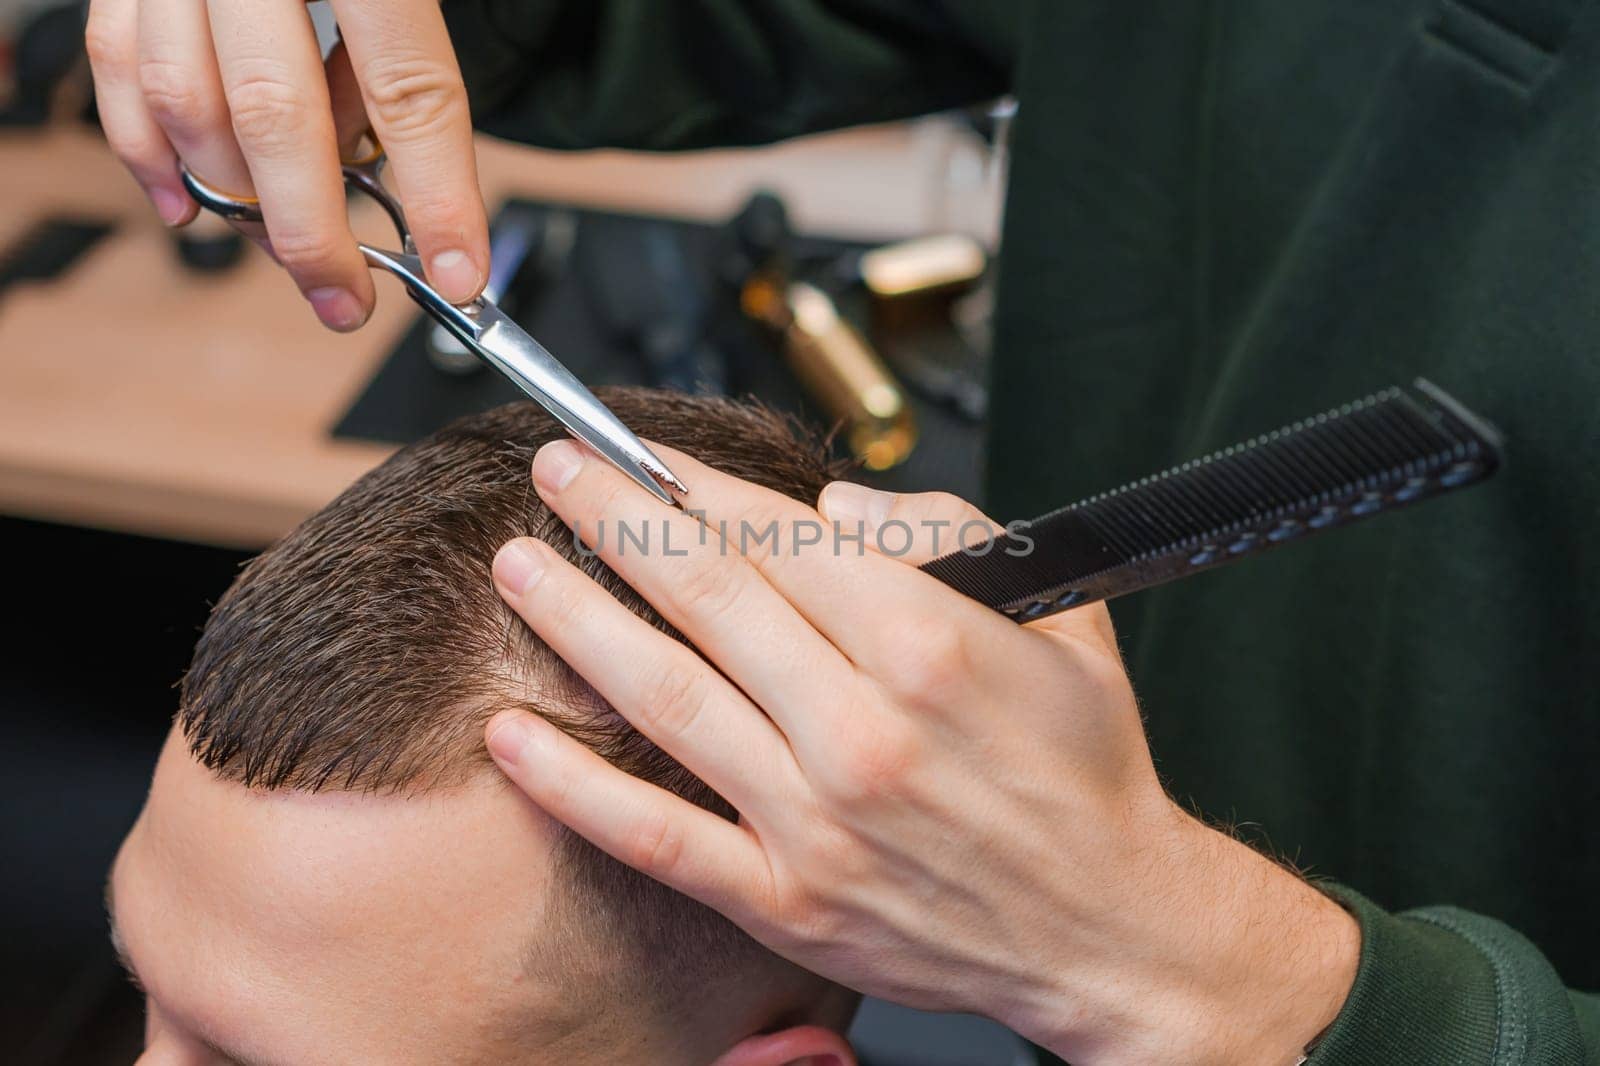 Hairstylist expertly trims the clients brunette hair using scissors at the barbershop. by vladimka